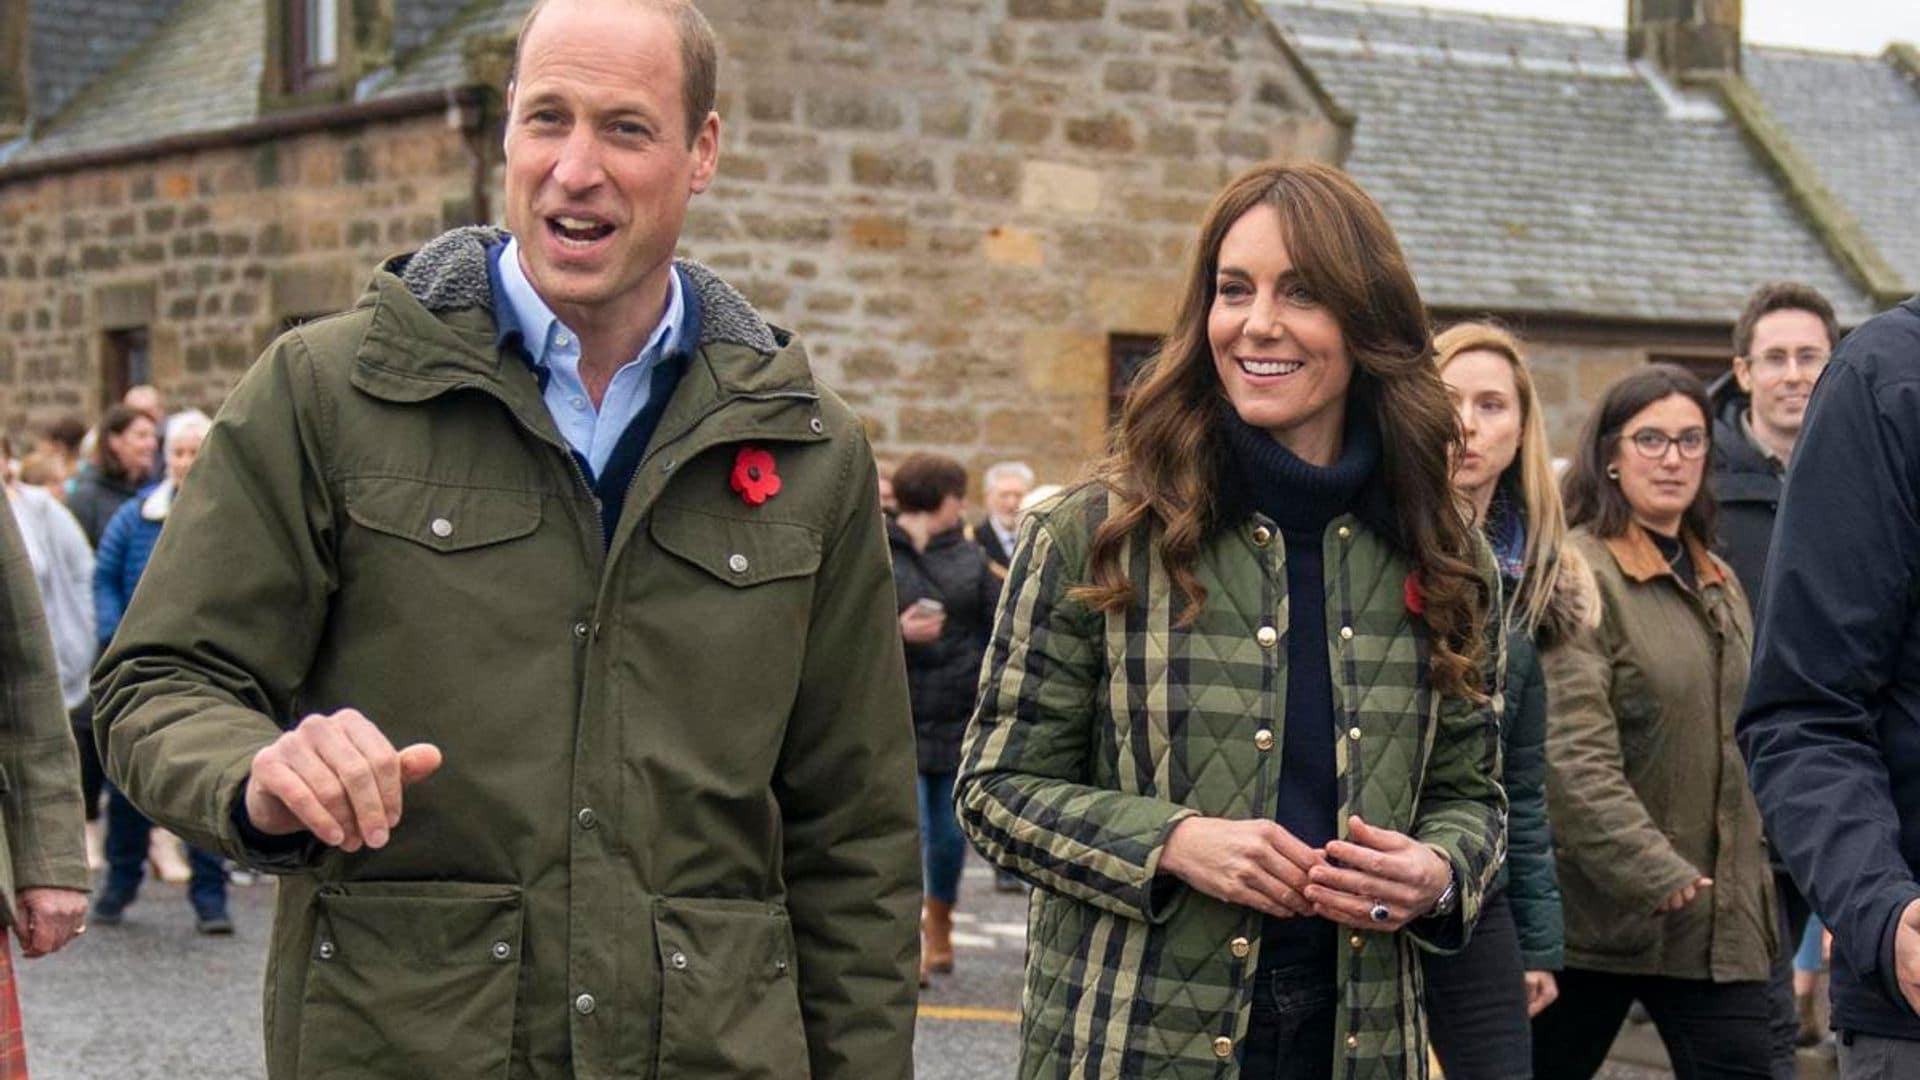 The Prince and Princess of Wales coordinate in Scotland